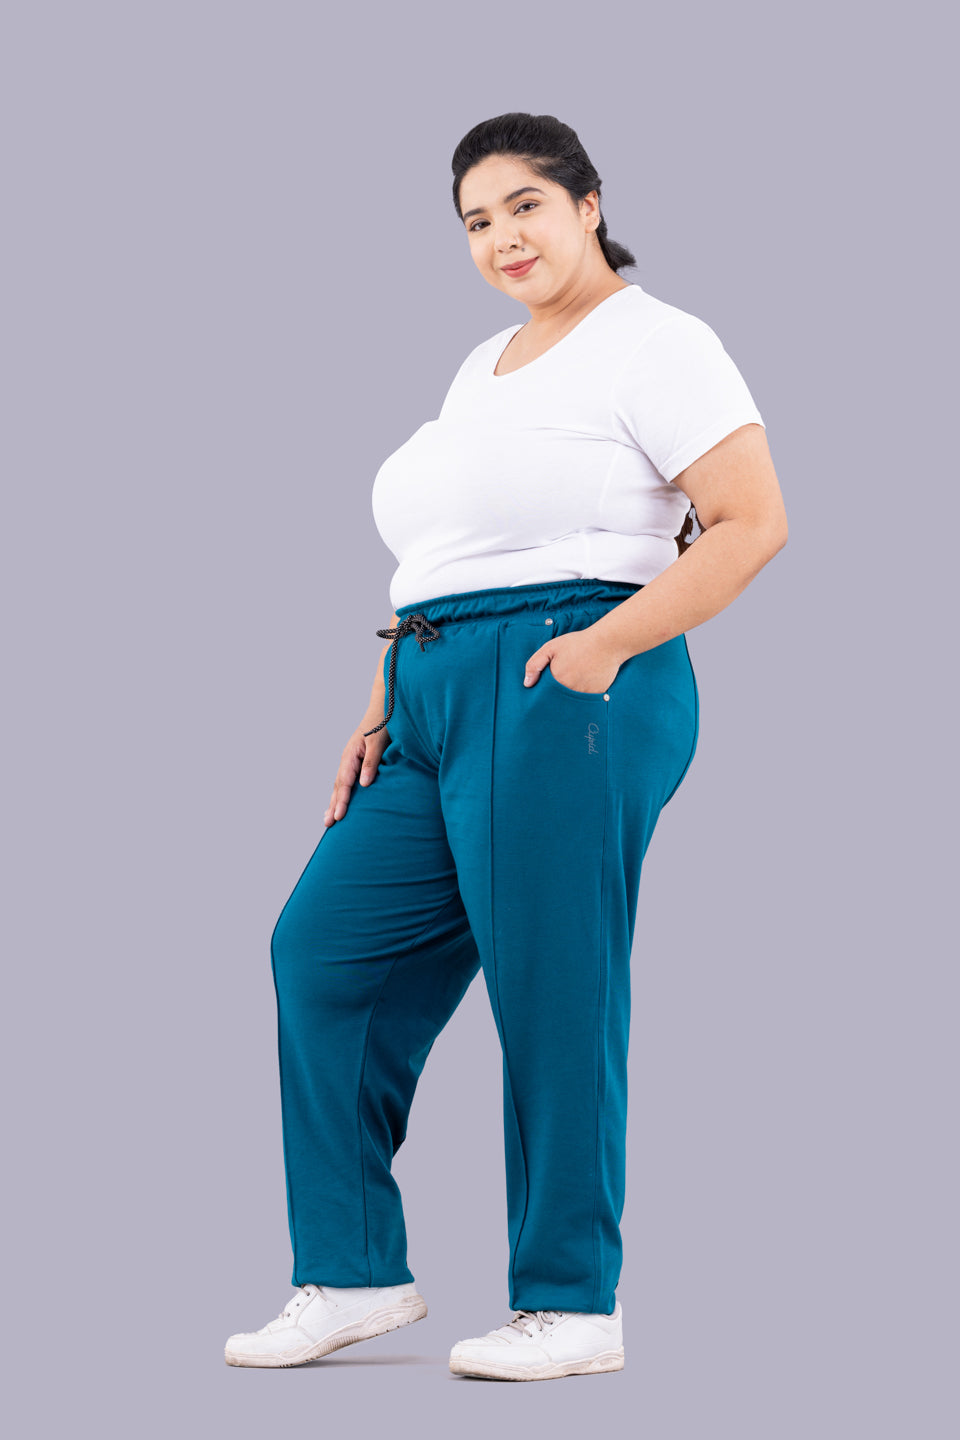 Comfy Teal Blue Relaxed Fit Cotton Trackpants for Women online in India at best prices